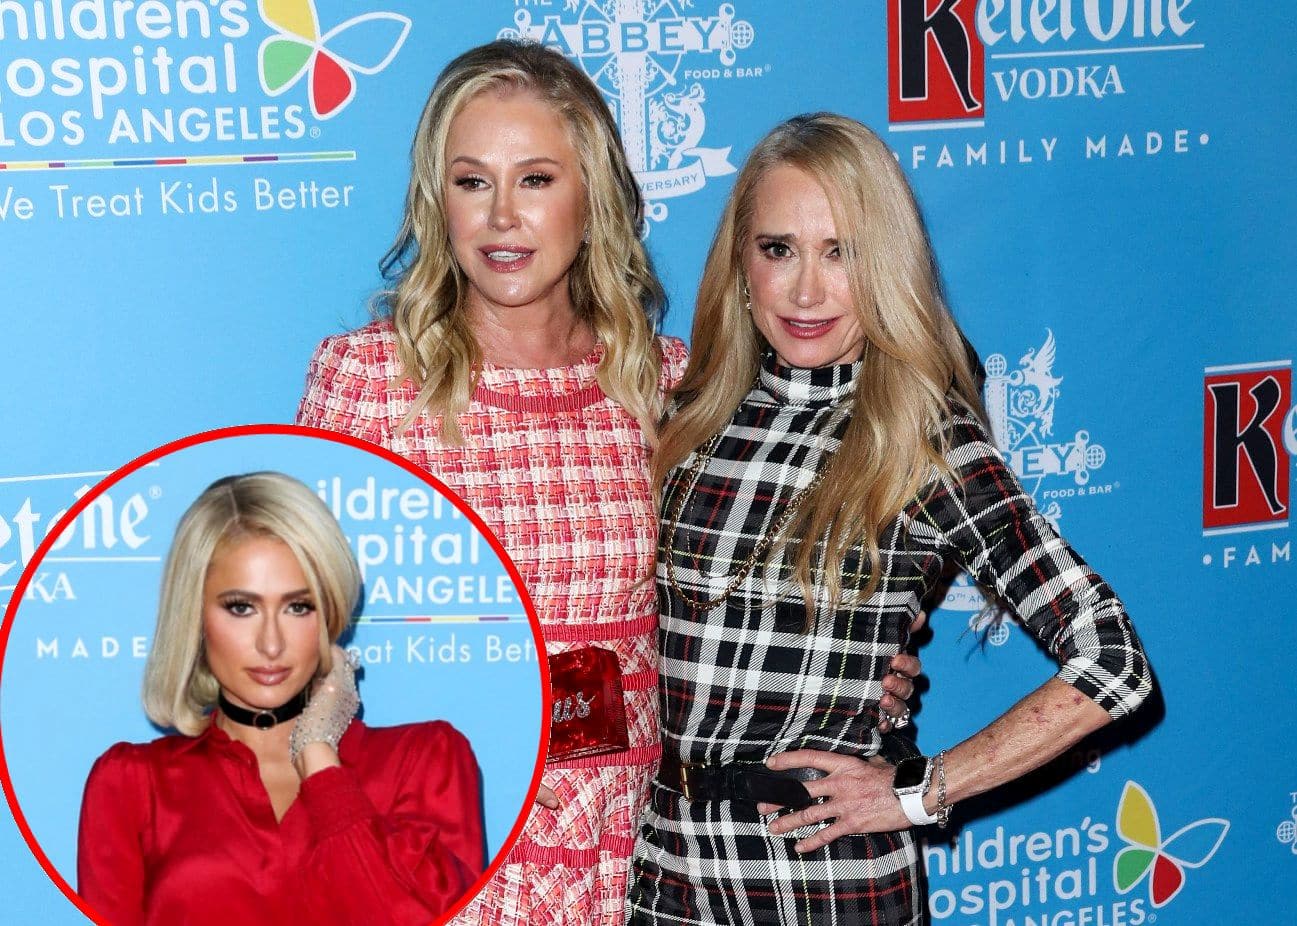 Kathy Hilton reveals whether Kim Richards was upset about Paris Hilton's No Phone Rule at the wedding, shares which RHOBH actor she spends most of the time with, and reacts to the Paris documentary